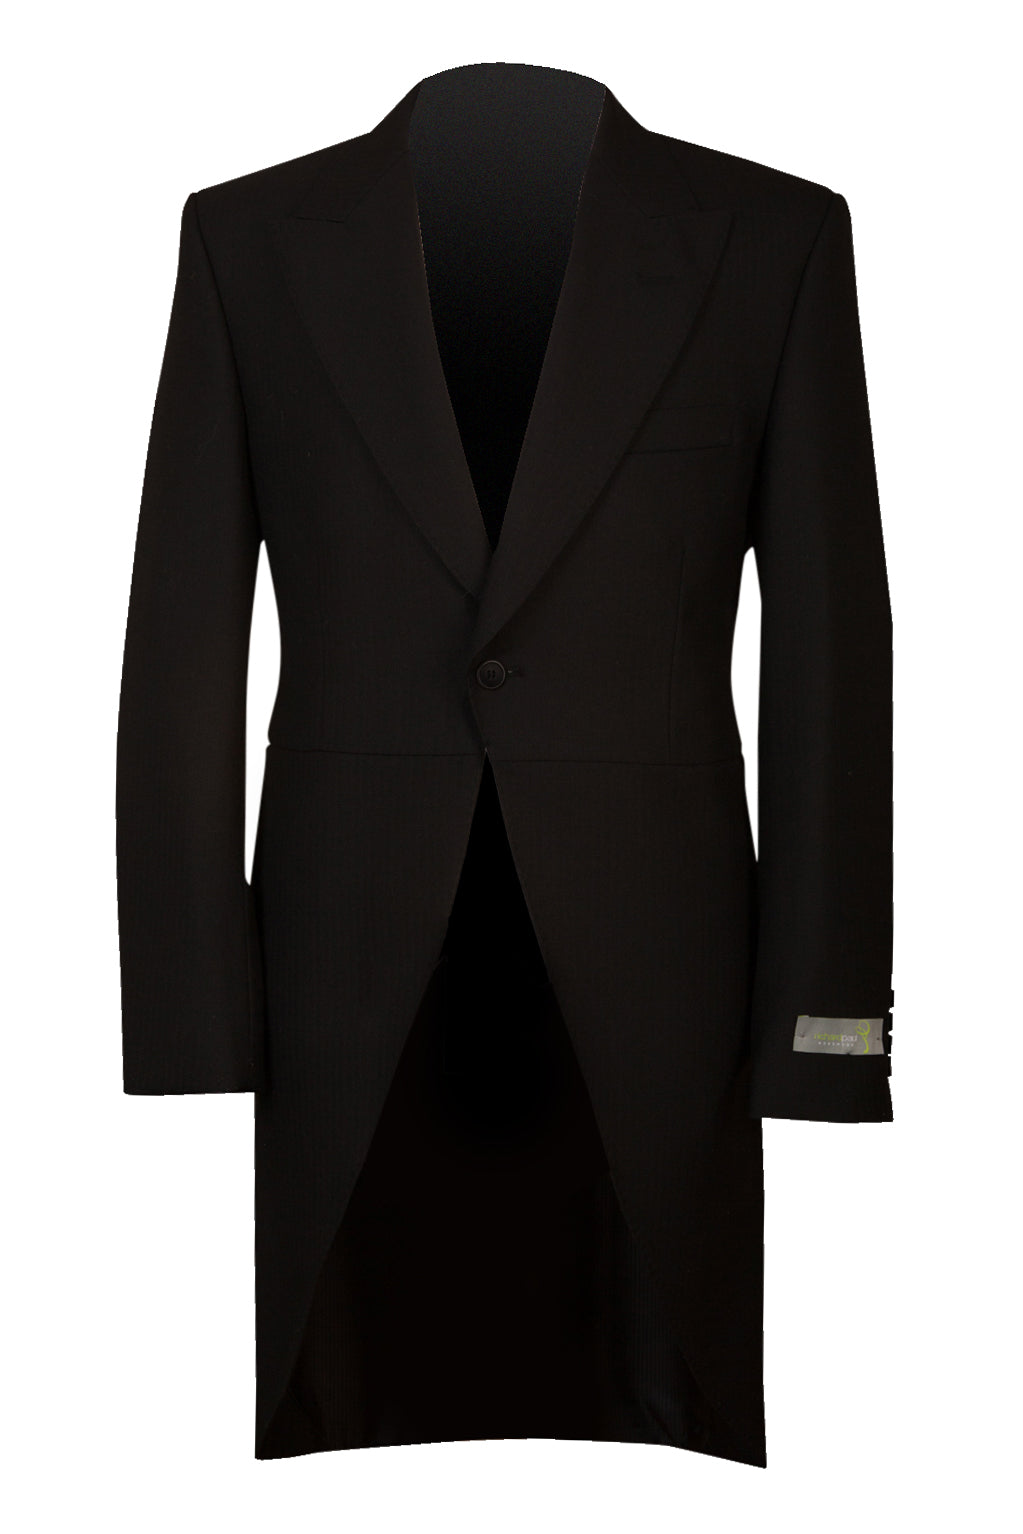 Black 2 Piece Tailcoat Morning Suit - Brand New